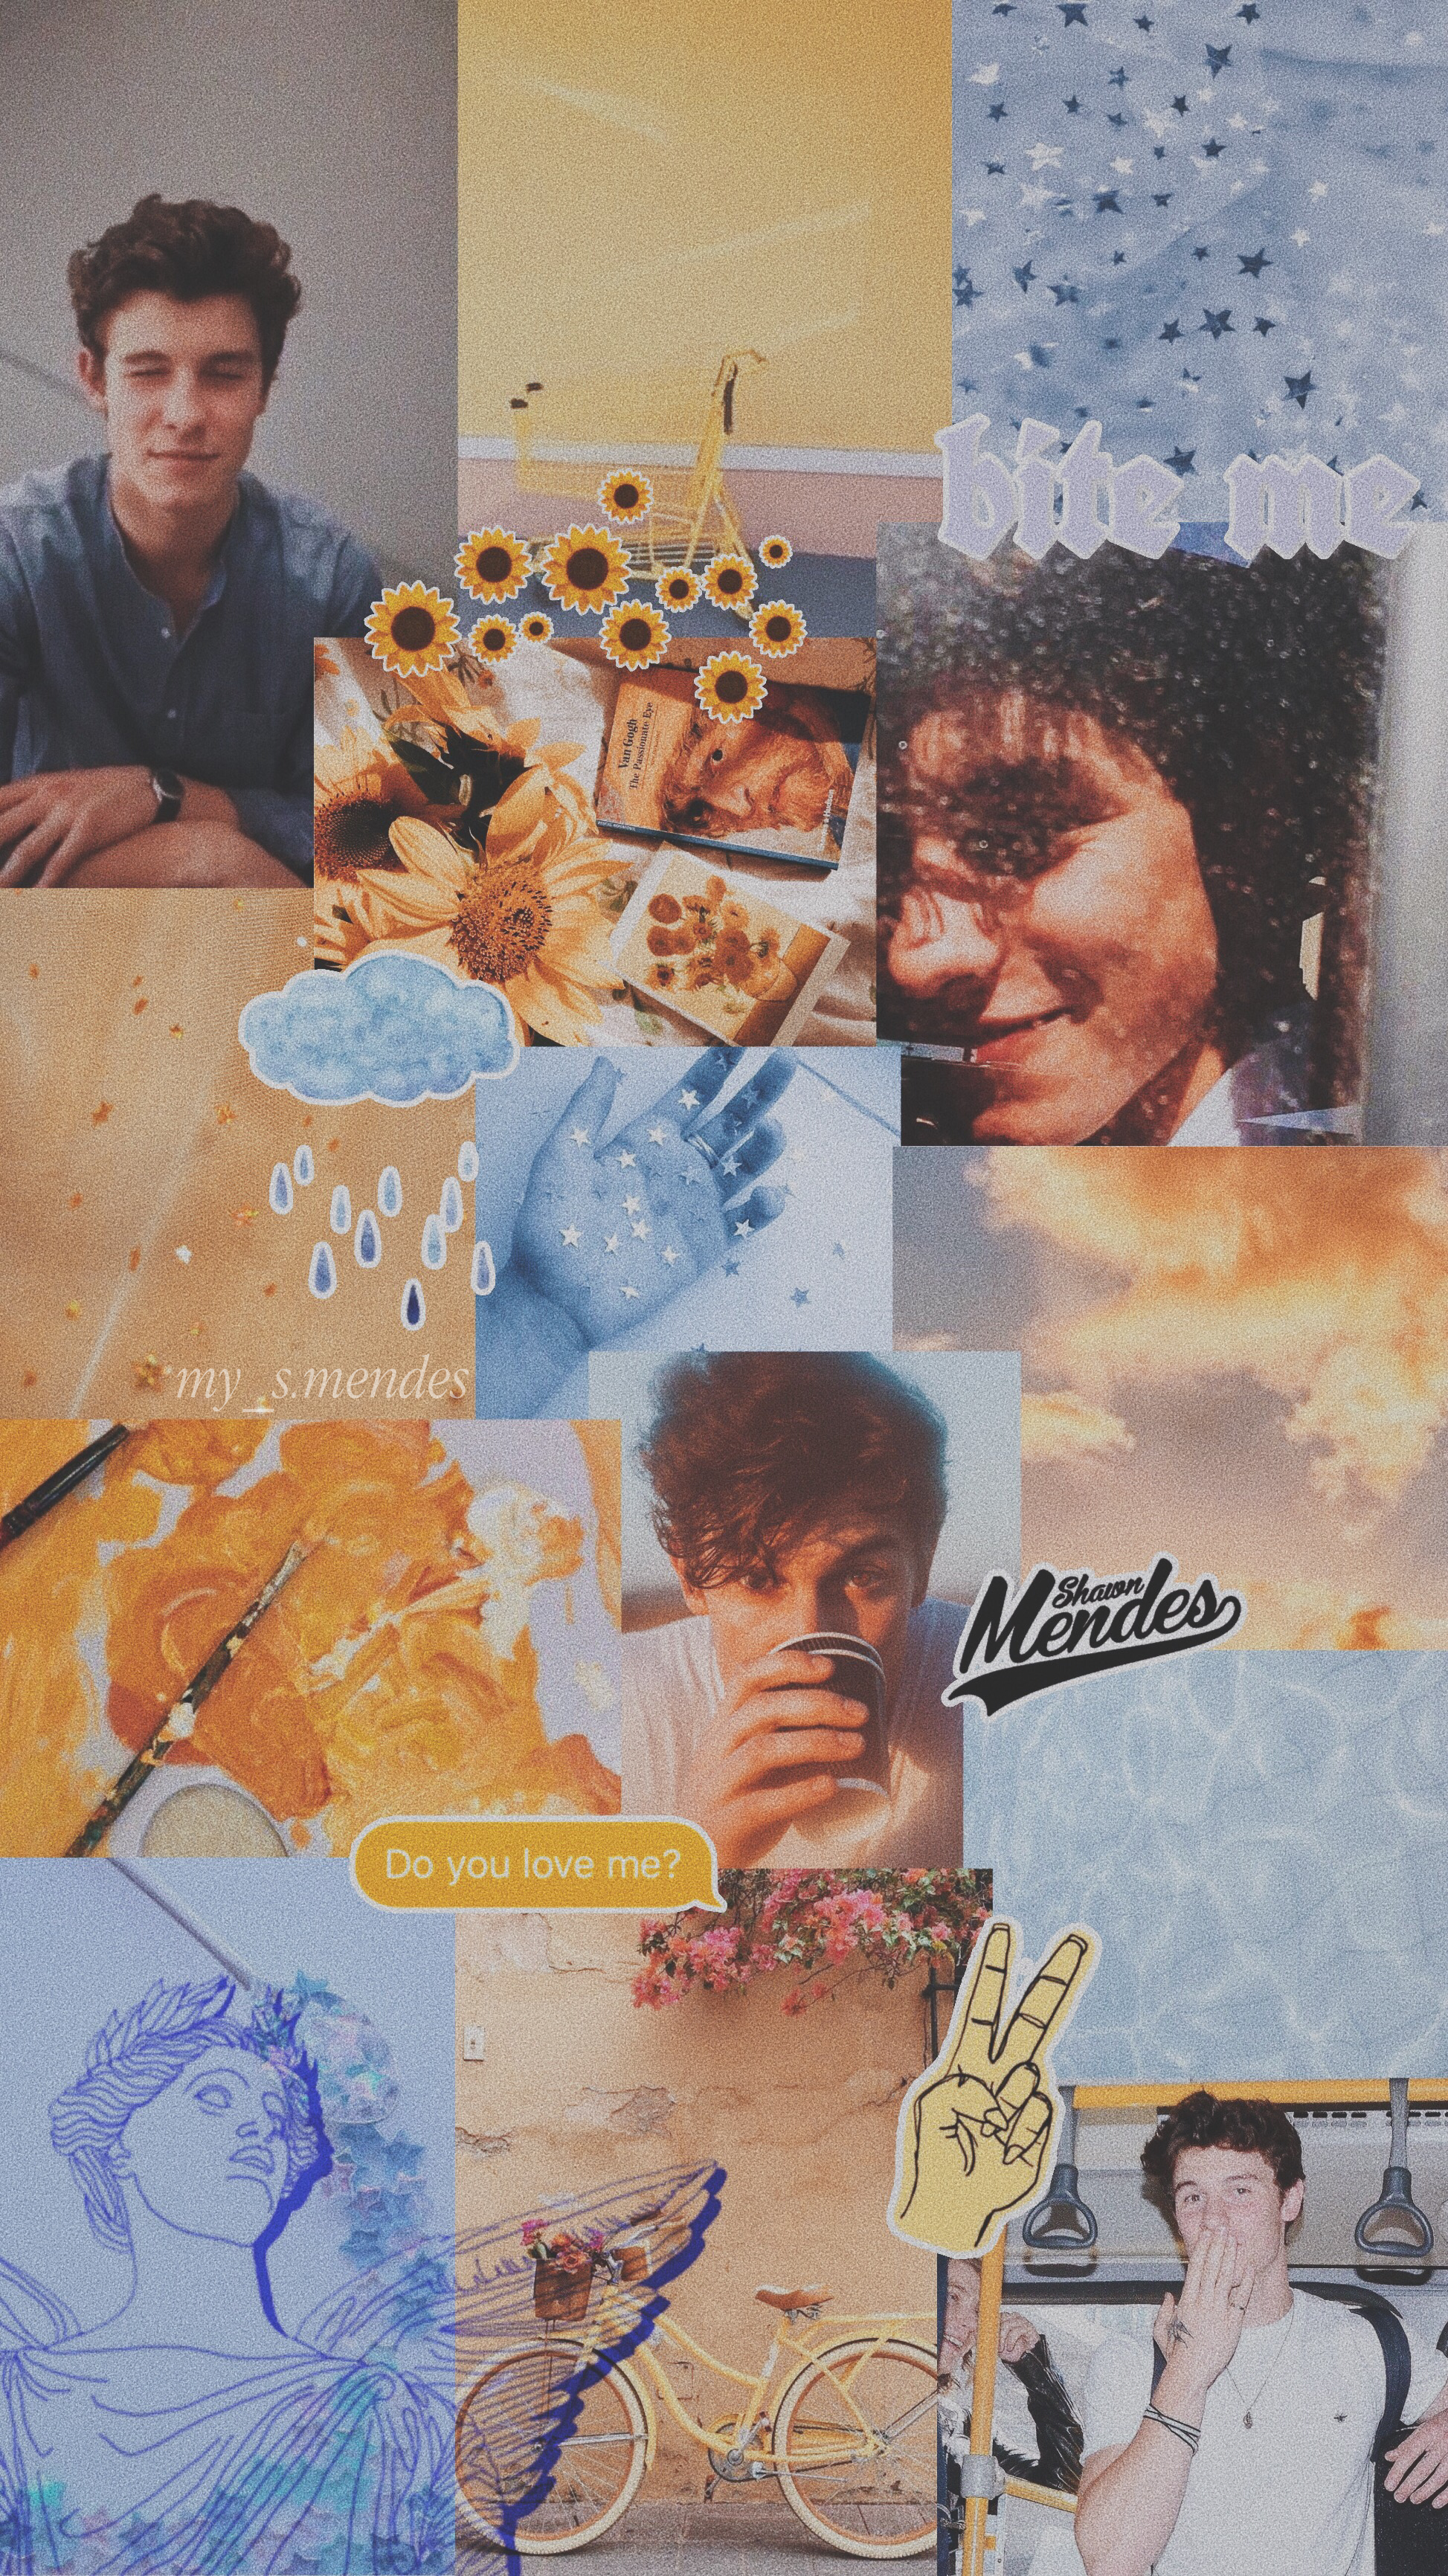 follow me on IG: #shawnmendes #shawnmendeswallpaper #lockscreen #wallpaper. Shawn mendes wallpaper, Shawn mendes tumblr, Shawn mendes lockscreen